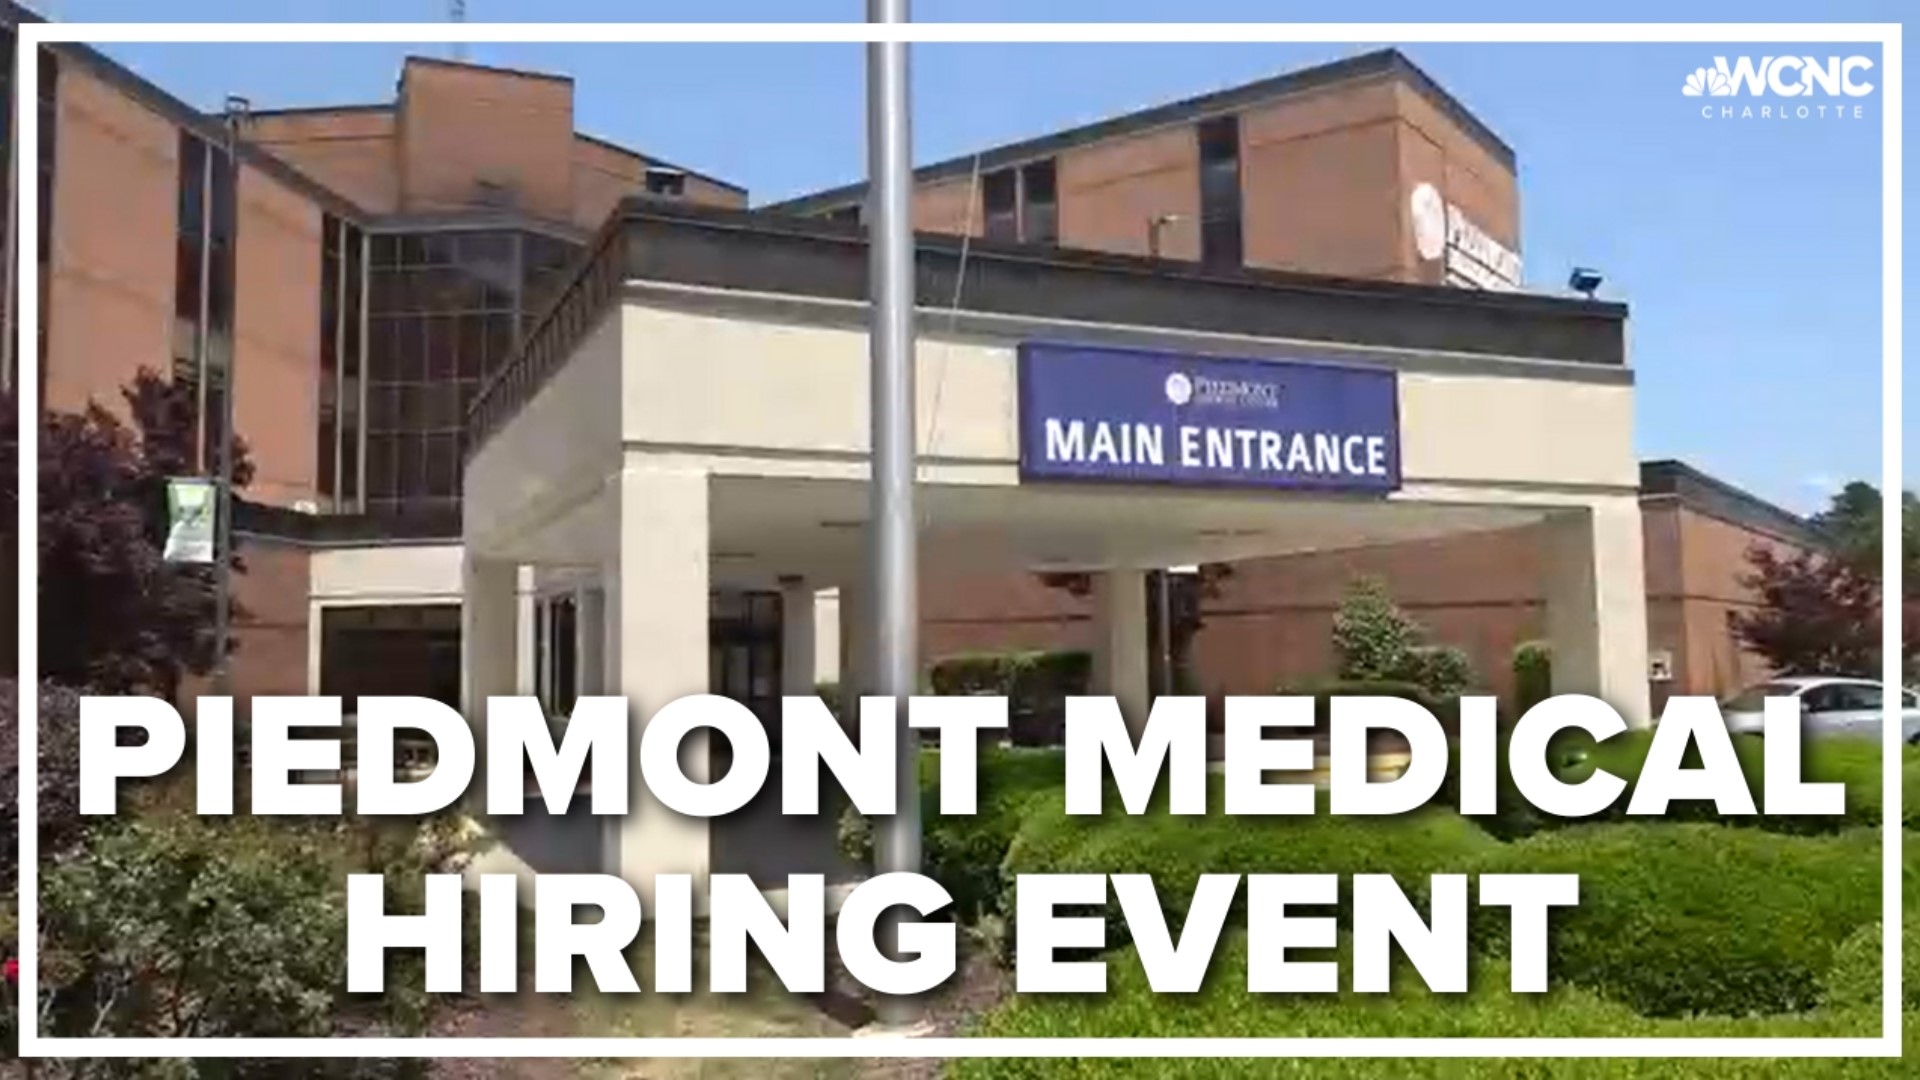 If you're looking for a job in the medical field, Piedmont Medical is looking for you!